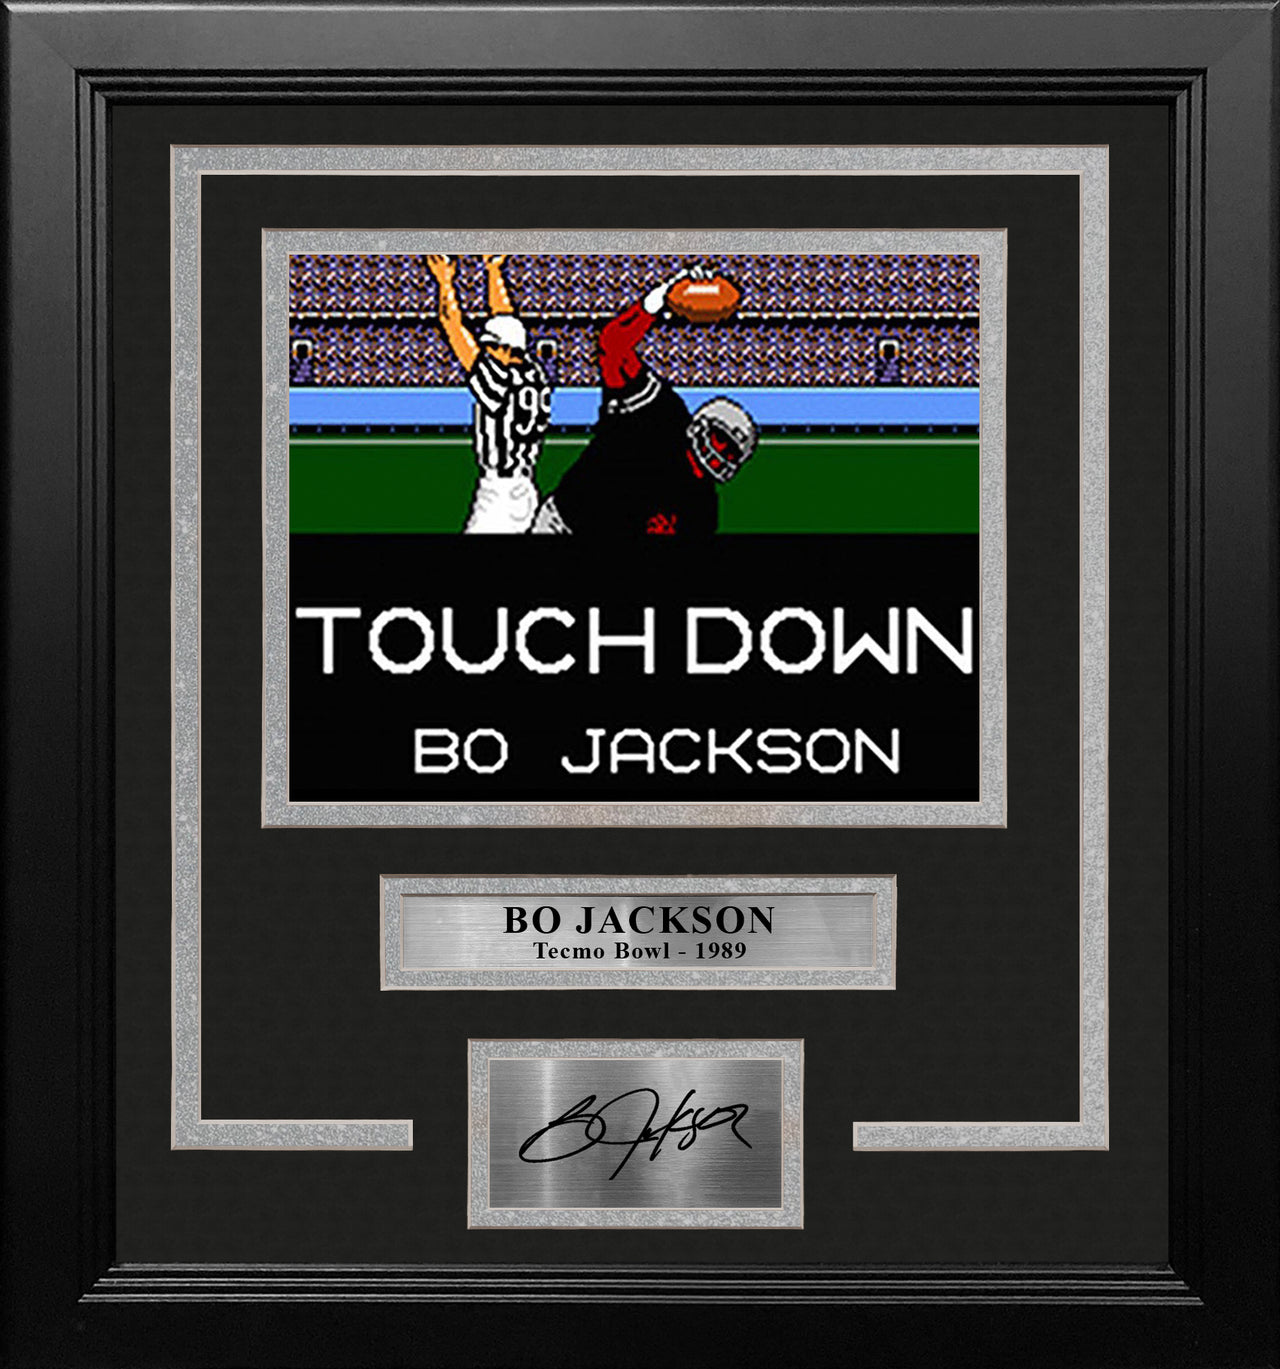 Bo Jackson Tecmo Bowl Touchdown 8" x 10" Framed Video Game Football Photo with Engraved Autograph - Dynasty Sports & Framing 